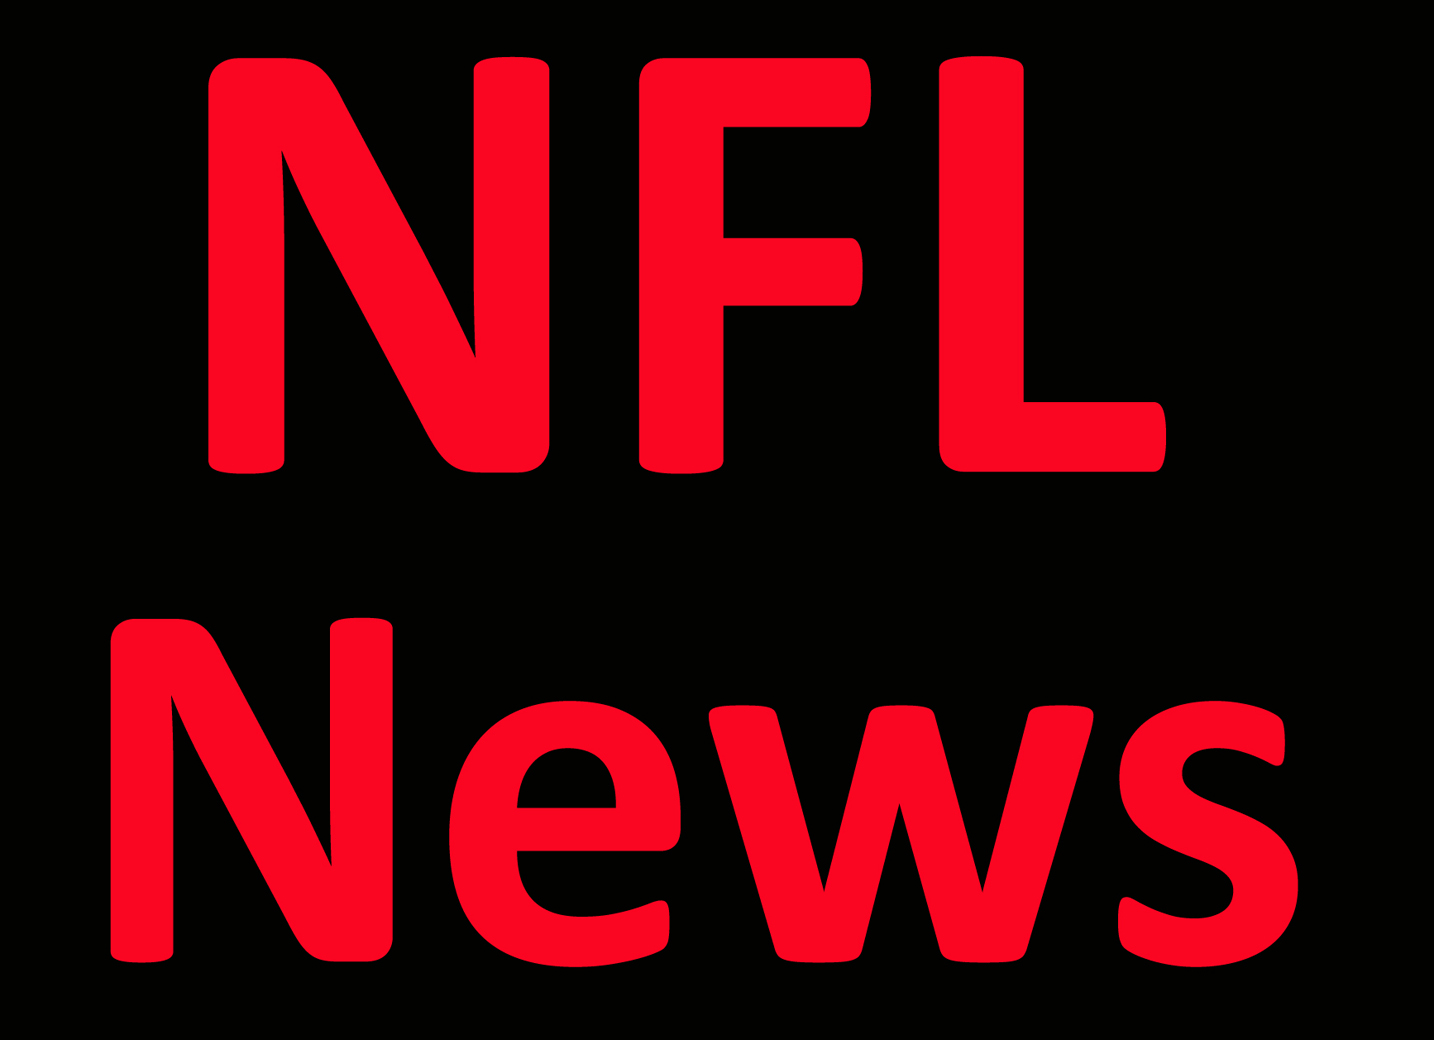 NFL News: Win total predictions: Our reporters make over/under picks for all 32 teams Per Report